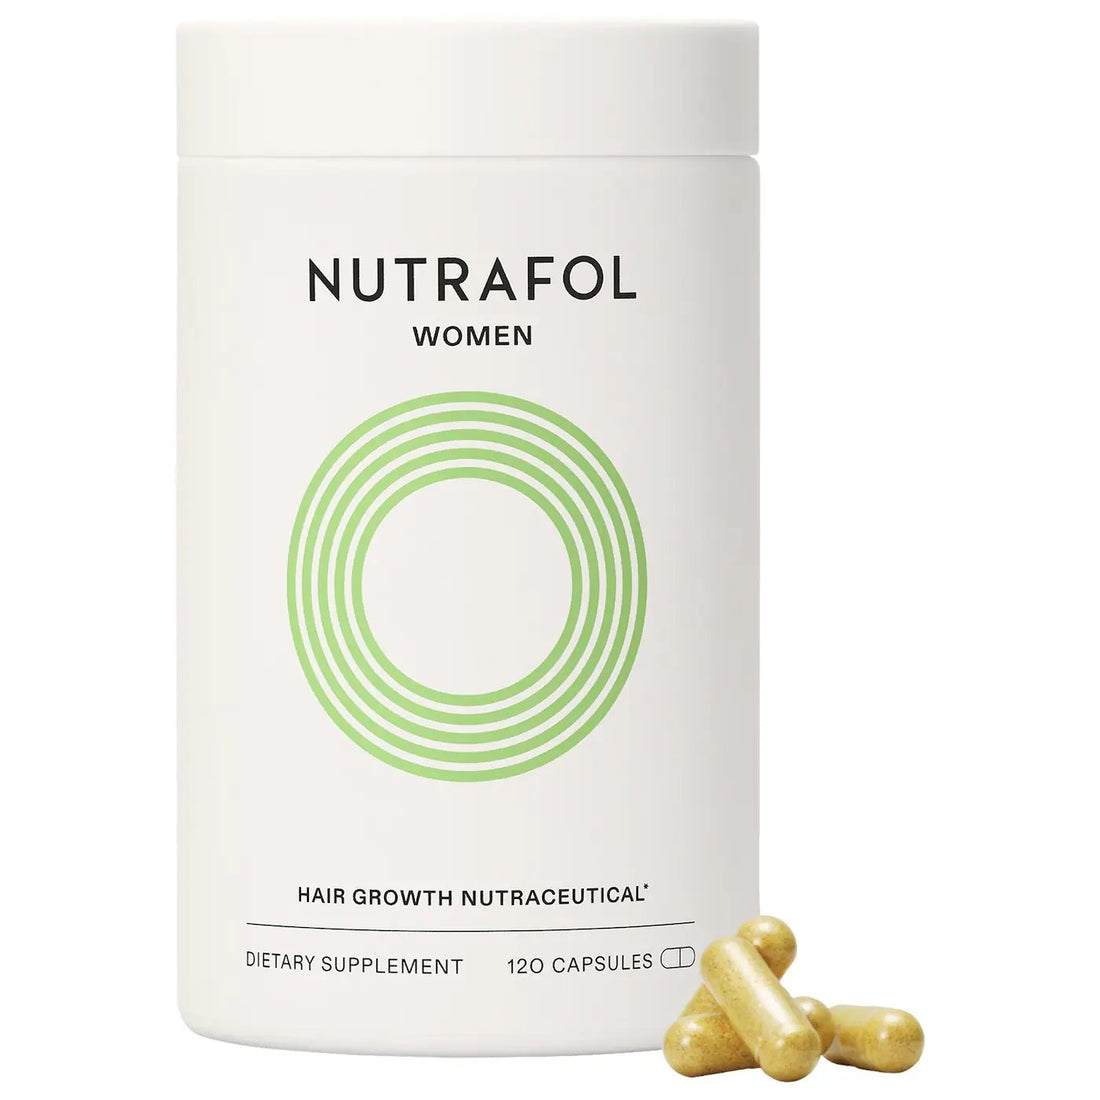 Nutrafol - The DLG Store